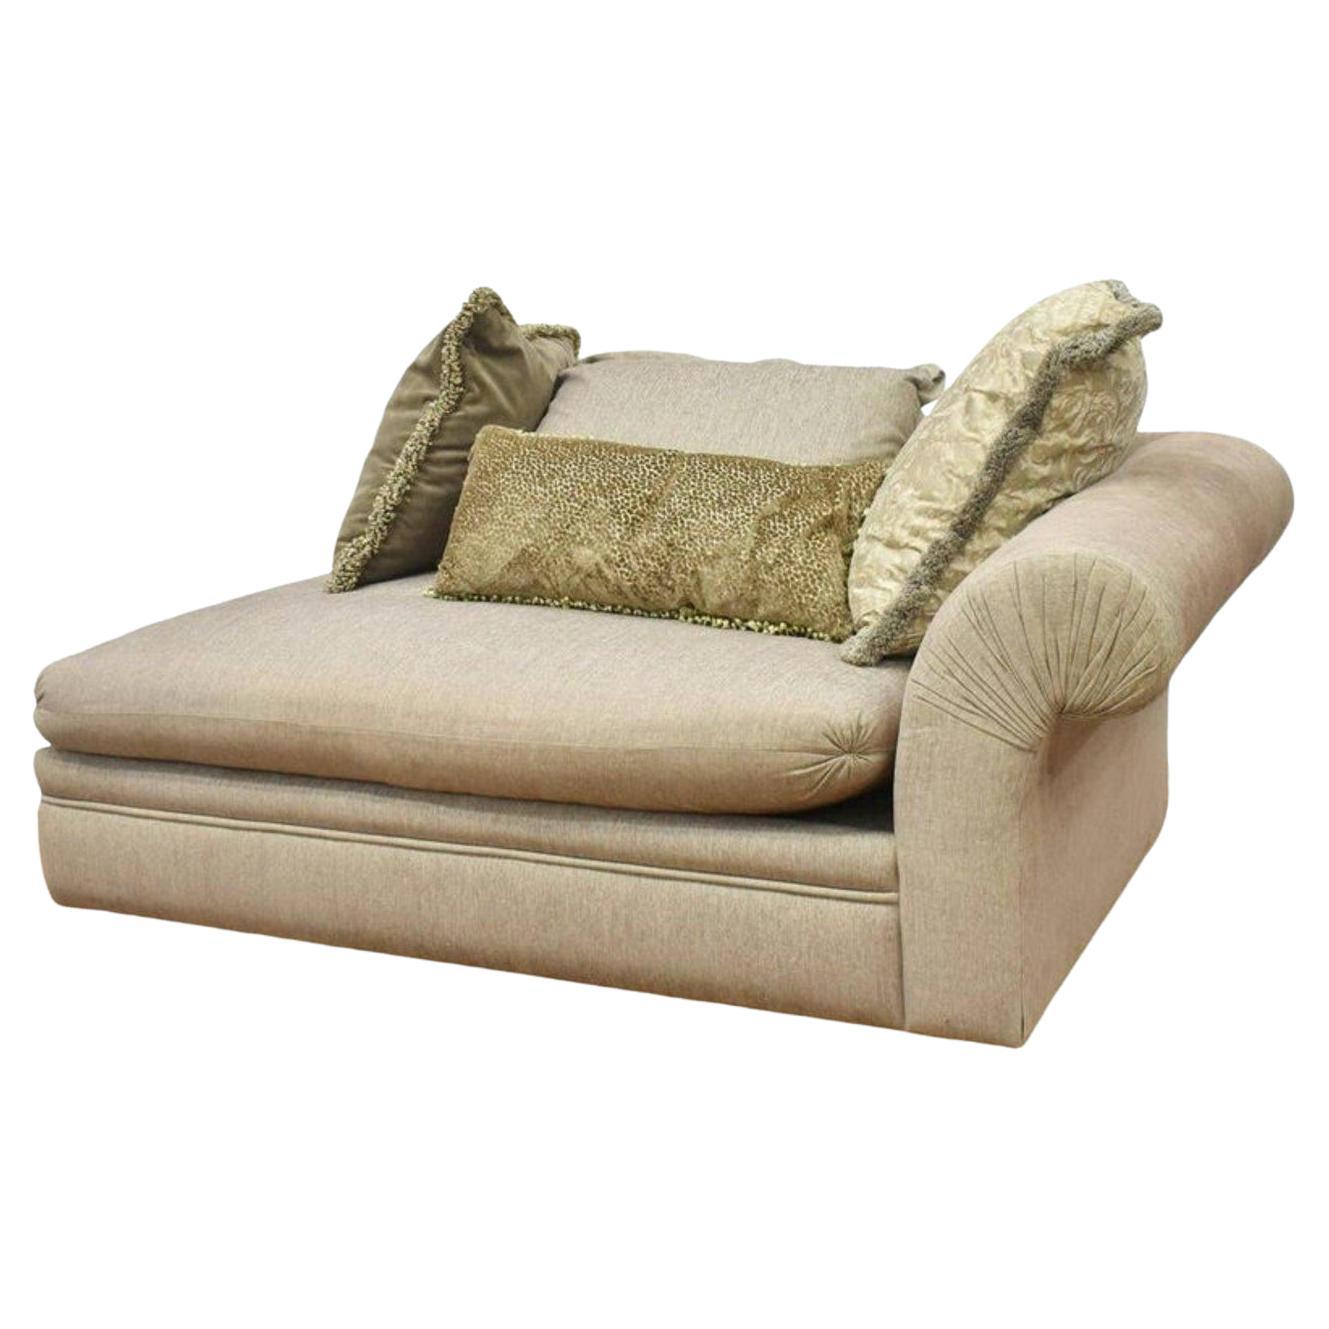 A. Rudin Upholstered Chaise Lounge Sofa with Fortuny Throw Pillows